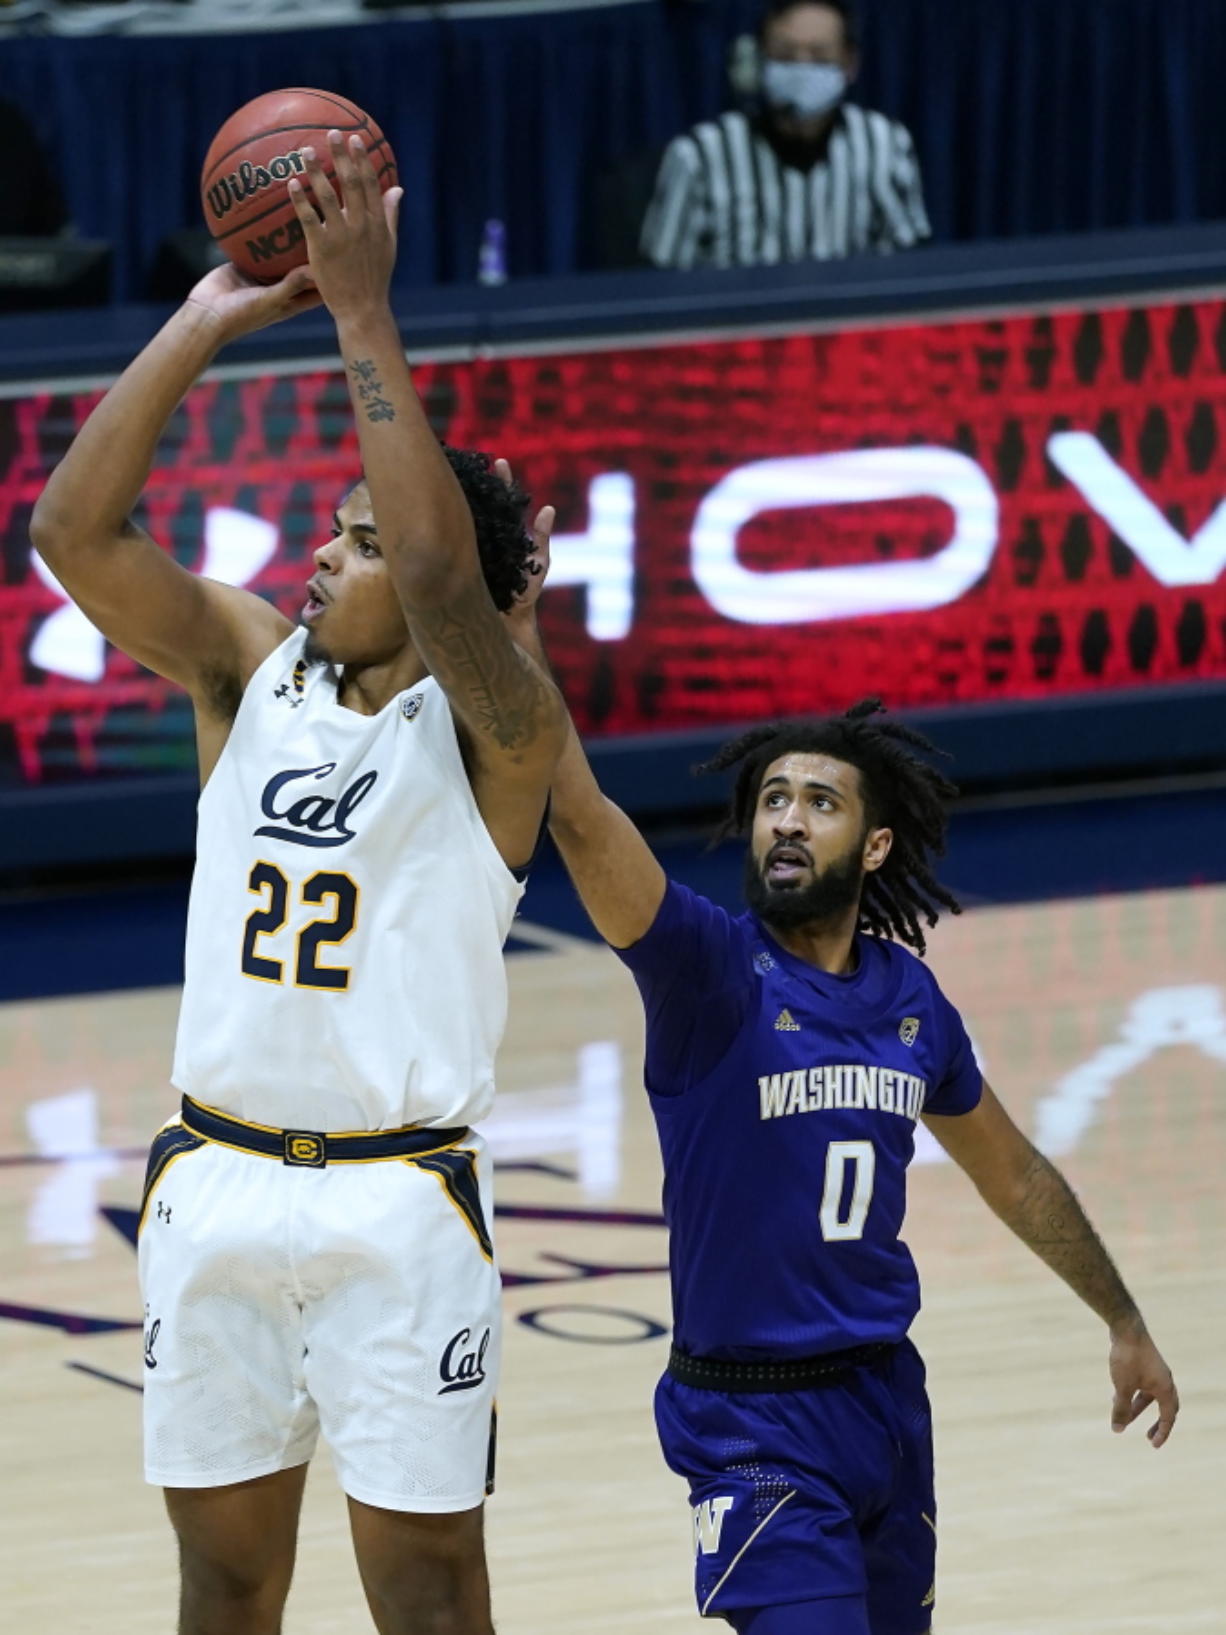 California forward Andre Kelly (22) takes a shot in front of Washington guard Marcus Tsohonis (0) during the first half of an NCAA college basketball game, Saturday, Jan. 9, 2021, in Berkeley, Calif.